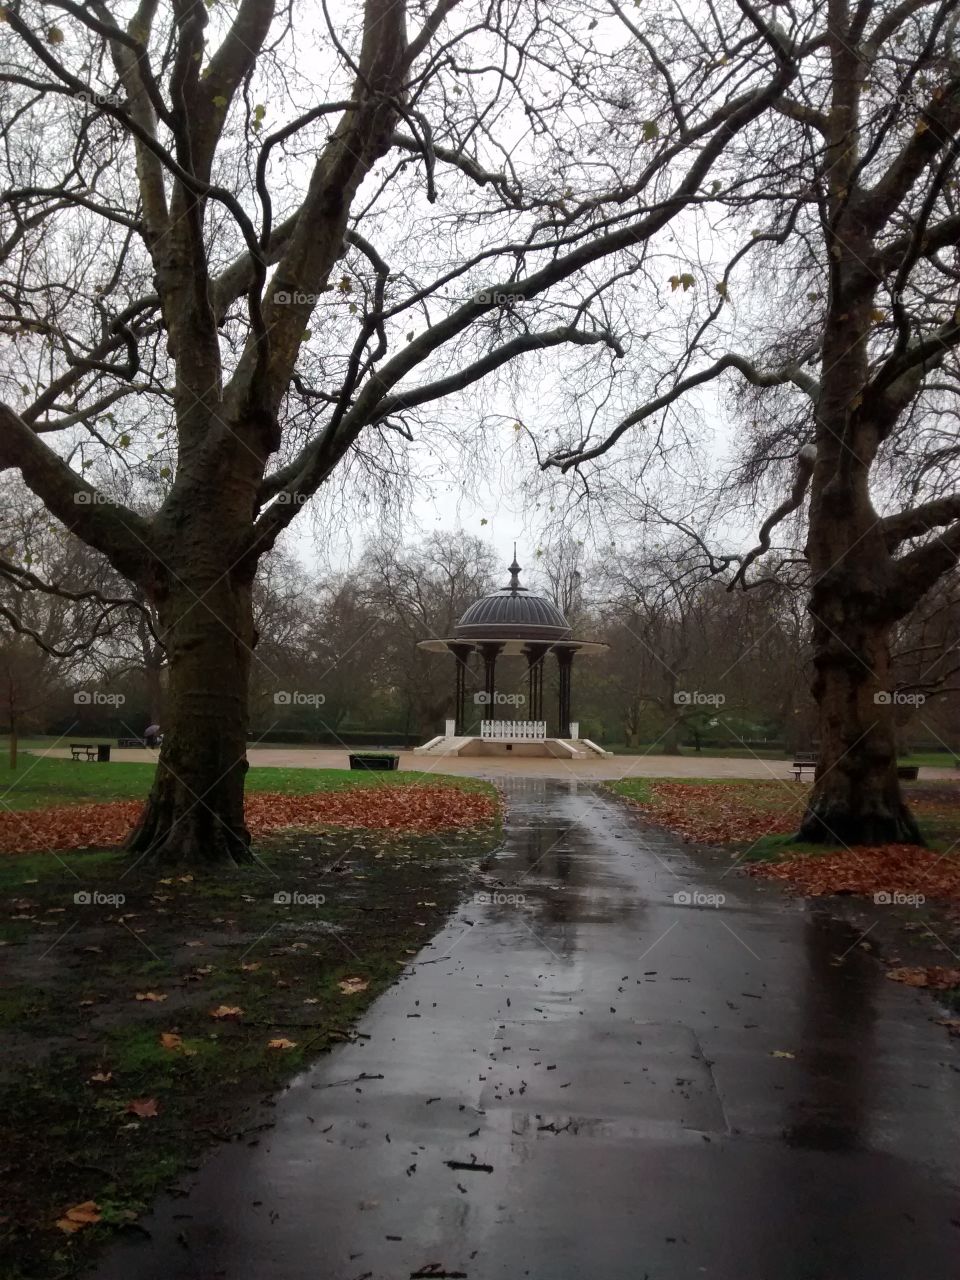 Bandstand in Autumn